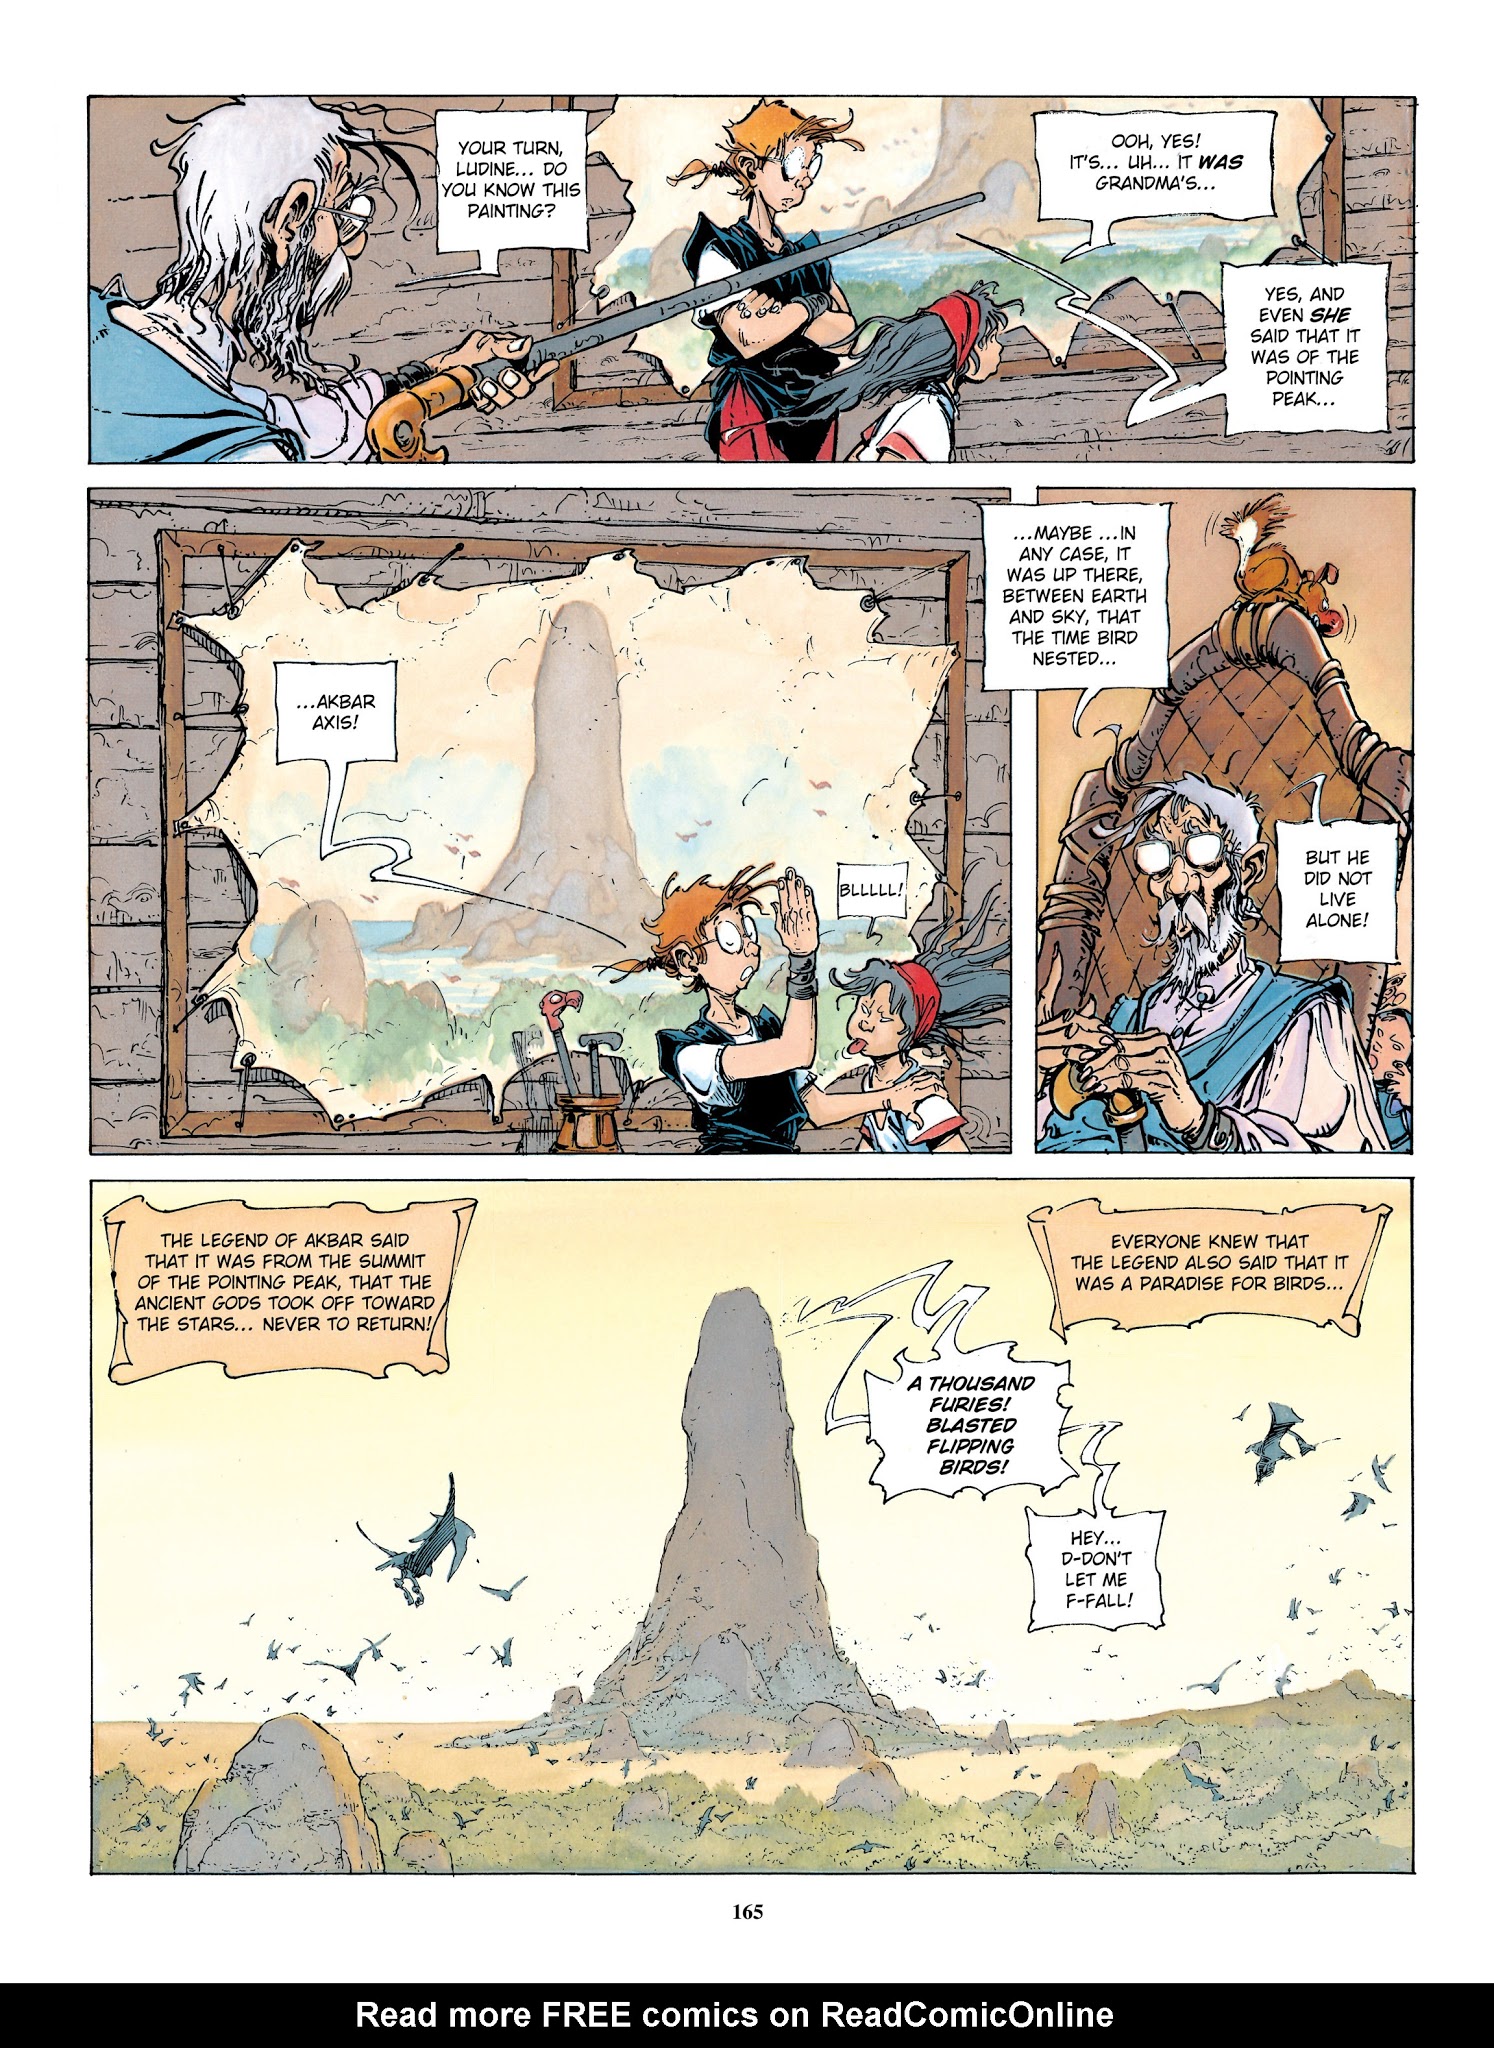 Read online The Quest for the Time Bird comic -  Issue # TPB - 166